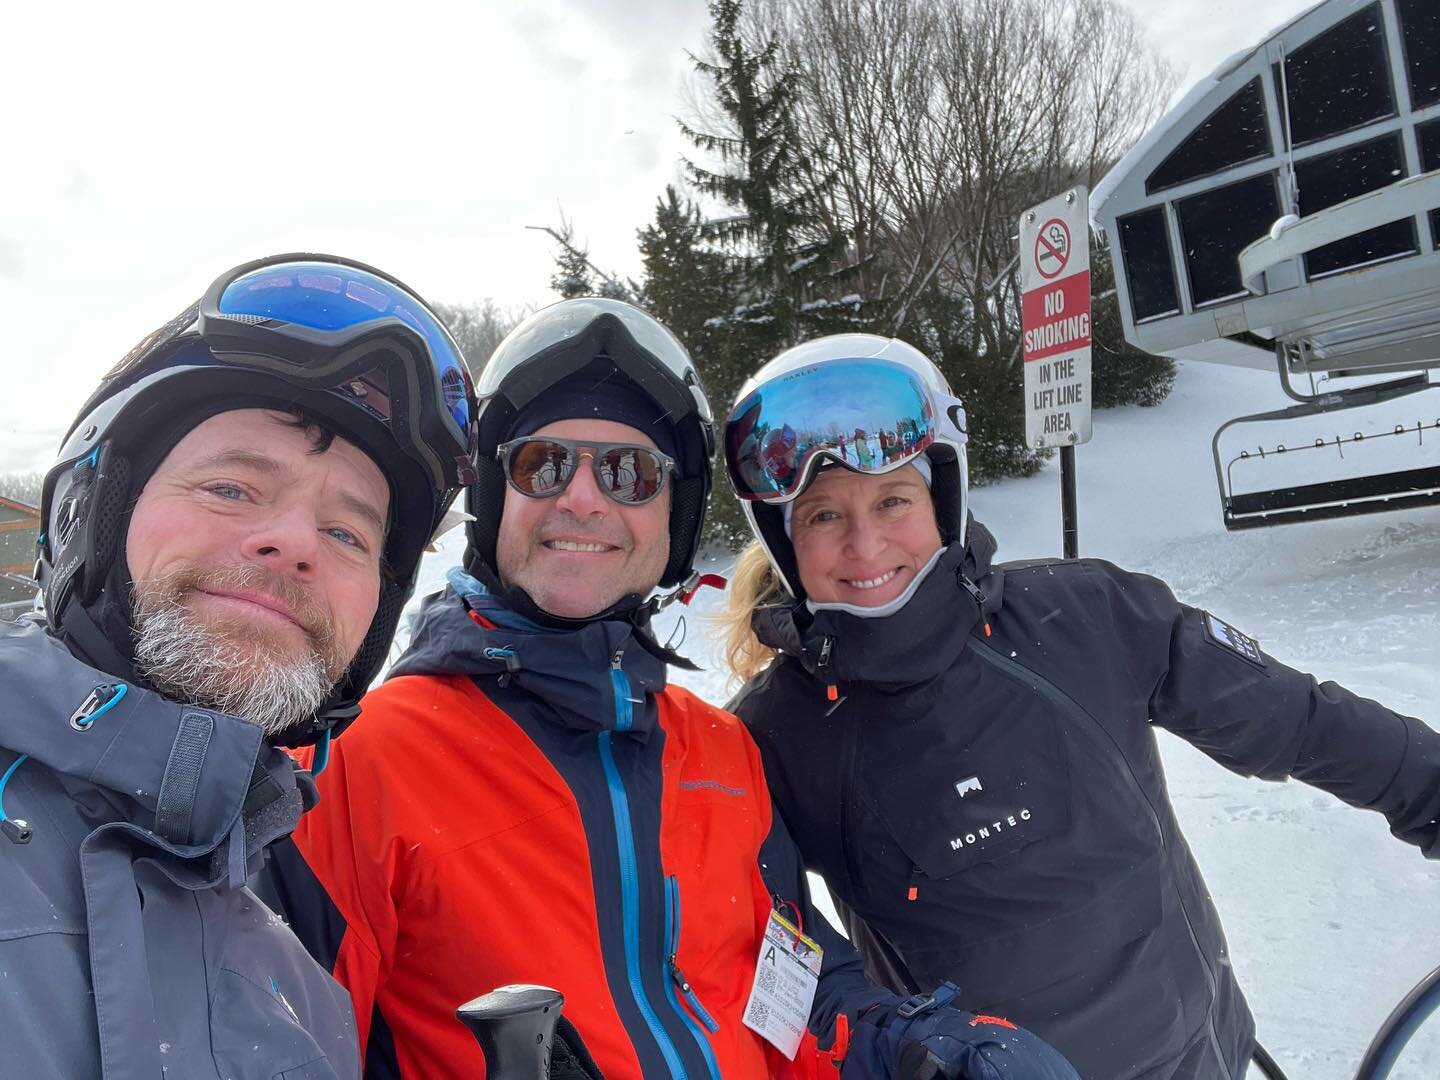 First ski wknd of 24! Fingers crossed the snow stays. Thx Shabones for hosting. ❤️⛷️🎿❄️🍷